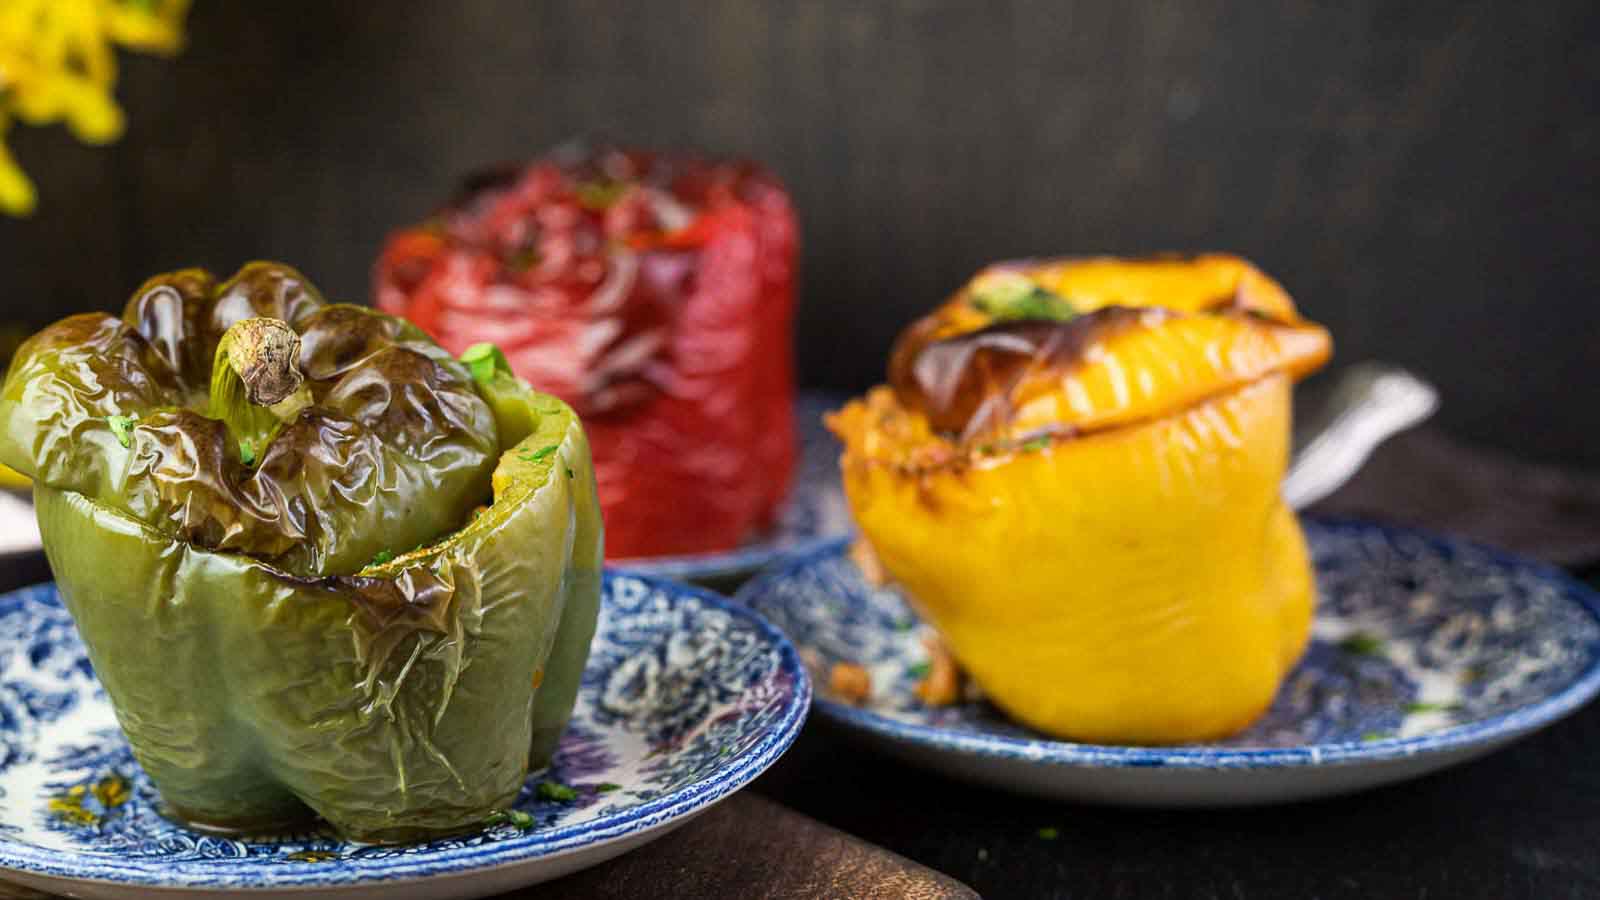 <p>Make easy Stuffed Bell Peppers with classic Bolognese sauce. They’re low carb, gluten-free, and perfect for meal prep or grilling.<br><strong>Get the Recipe: </strong><a href="https://www.lowcarb-nocarb.com/keto-stuffed-bell-peppers/?utm_source=msn&utm_medium=page&utm_campaign=Your%20title%20here:%20it%20should%20be%2055-60%20characters,%20ideally">Stuffed Bell Peppers</a></p>